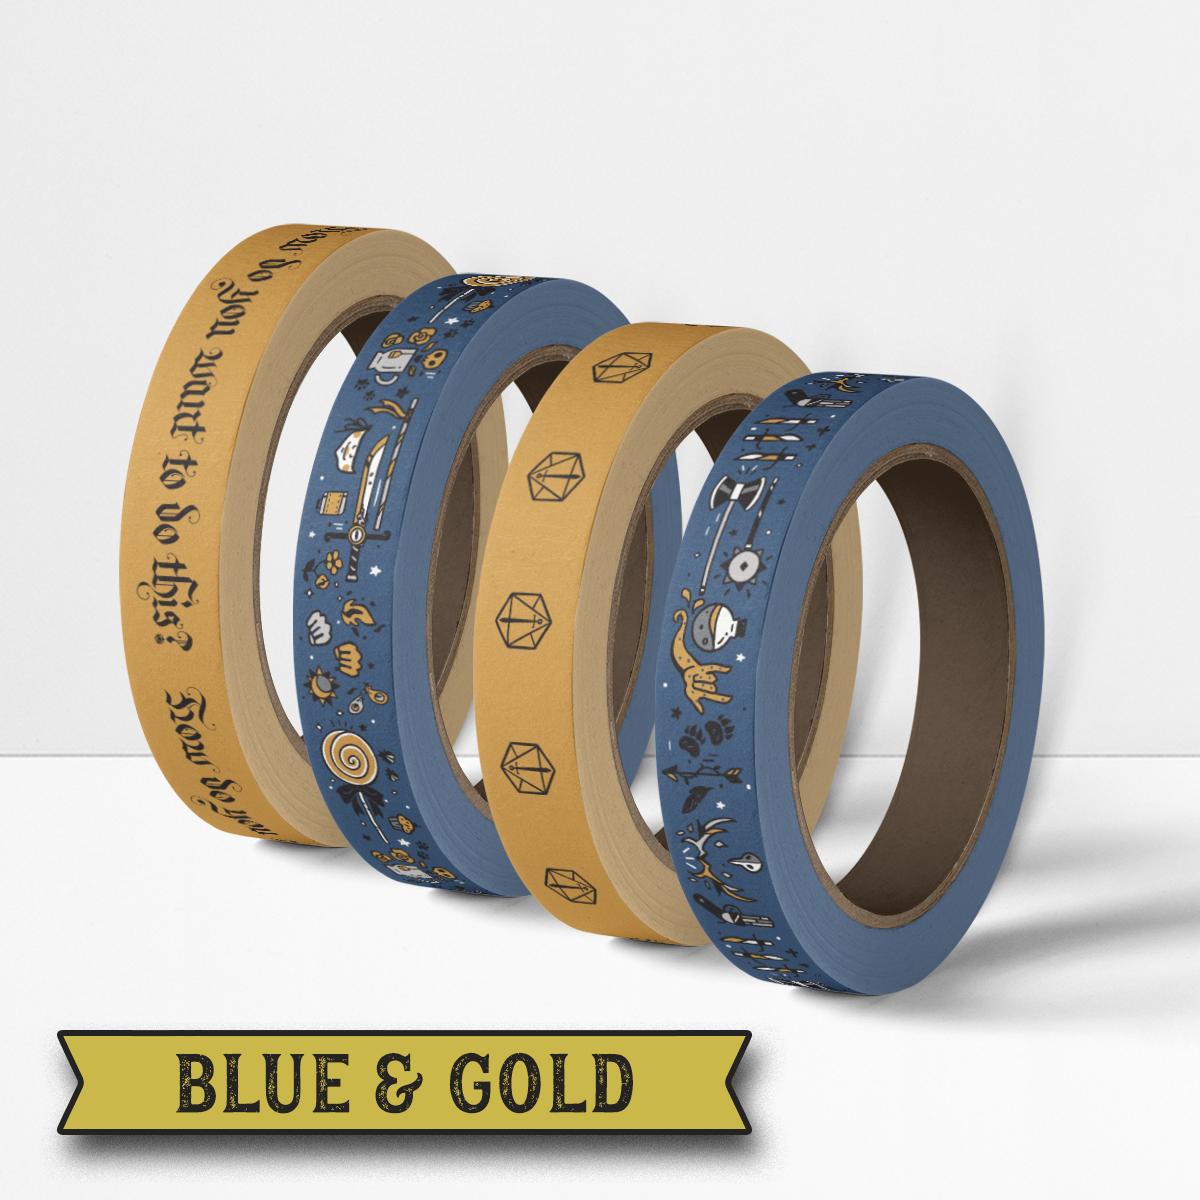 BLUE DOLPHIN TAPES Washi Gold Tape